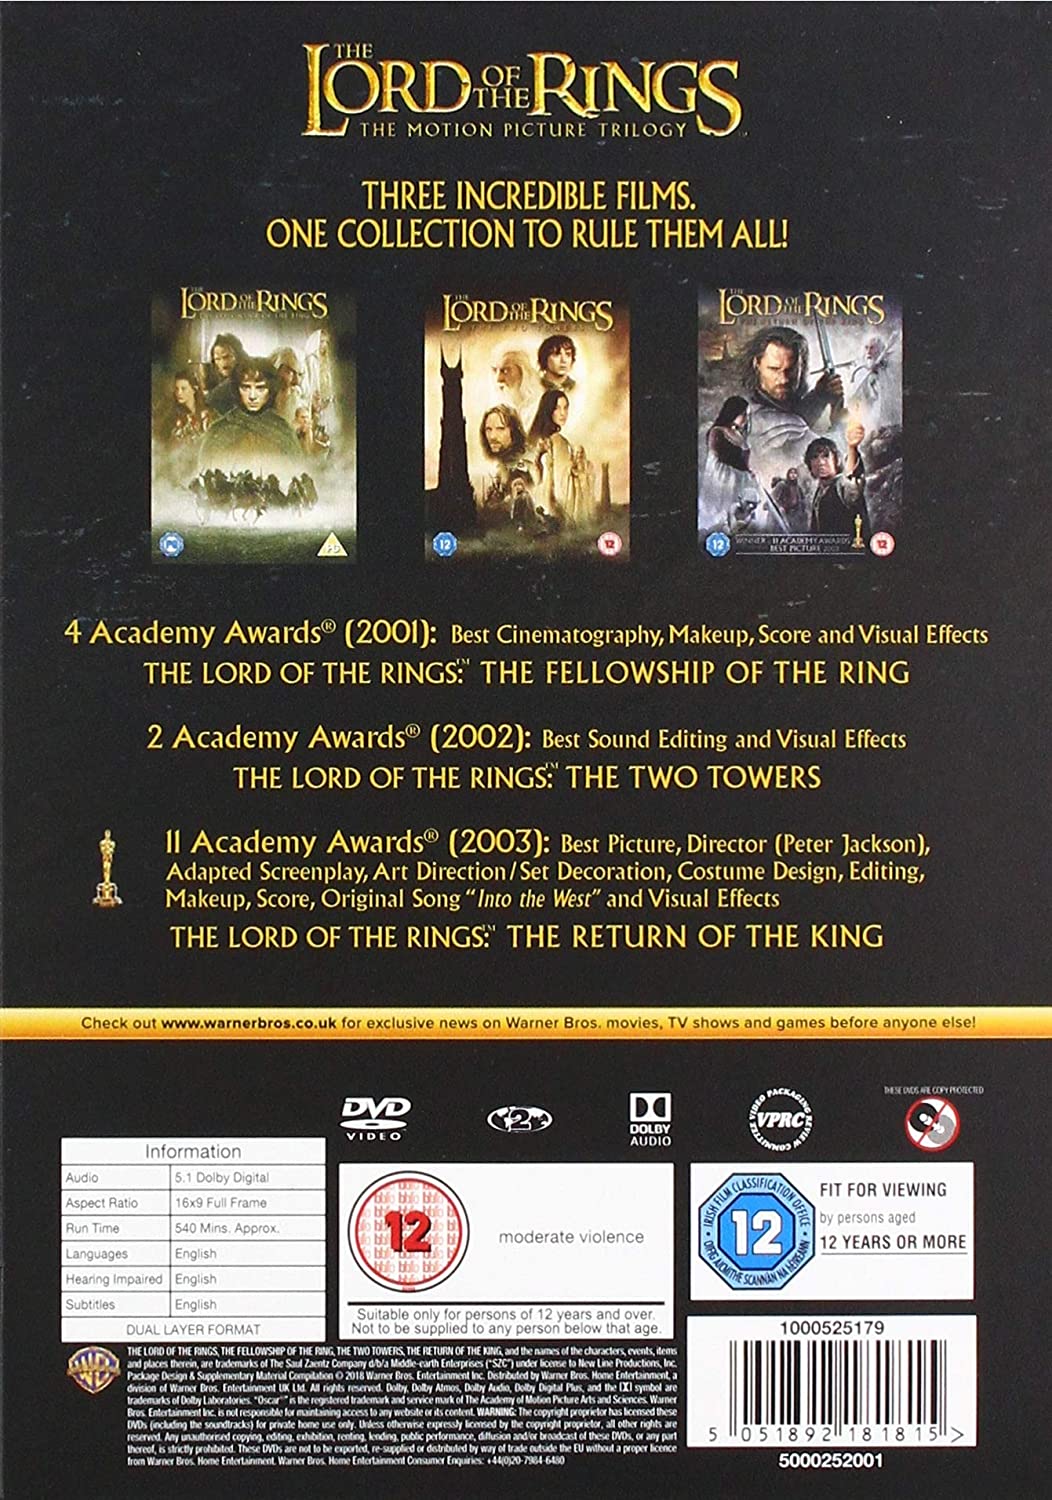 The Lord Of The Rings Trilogy - Fantasy/Adventure [DVD]